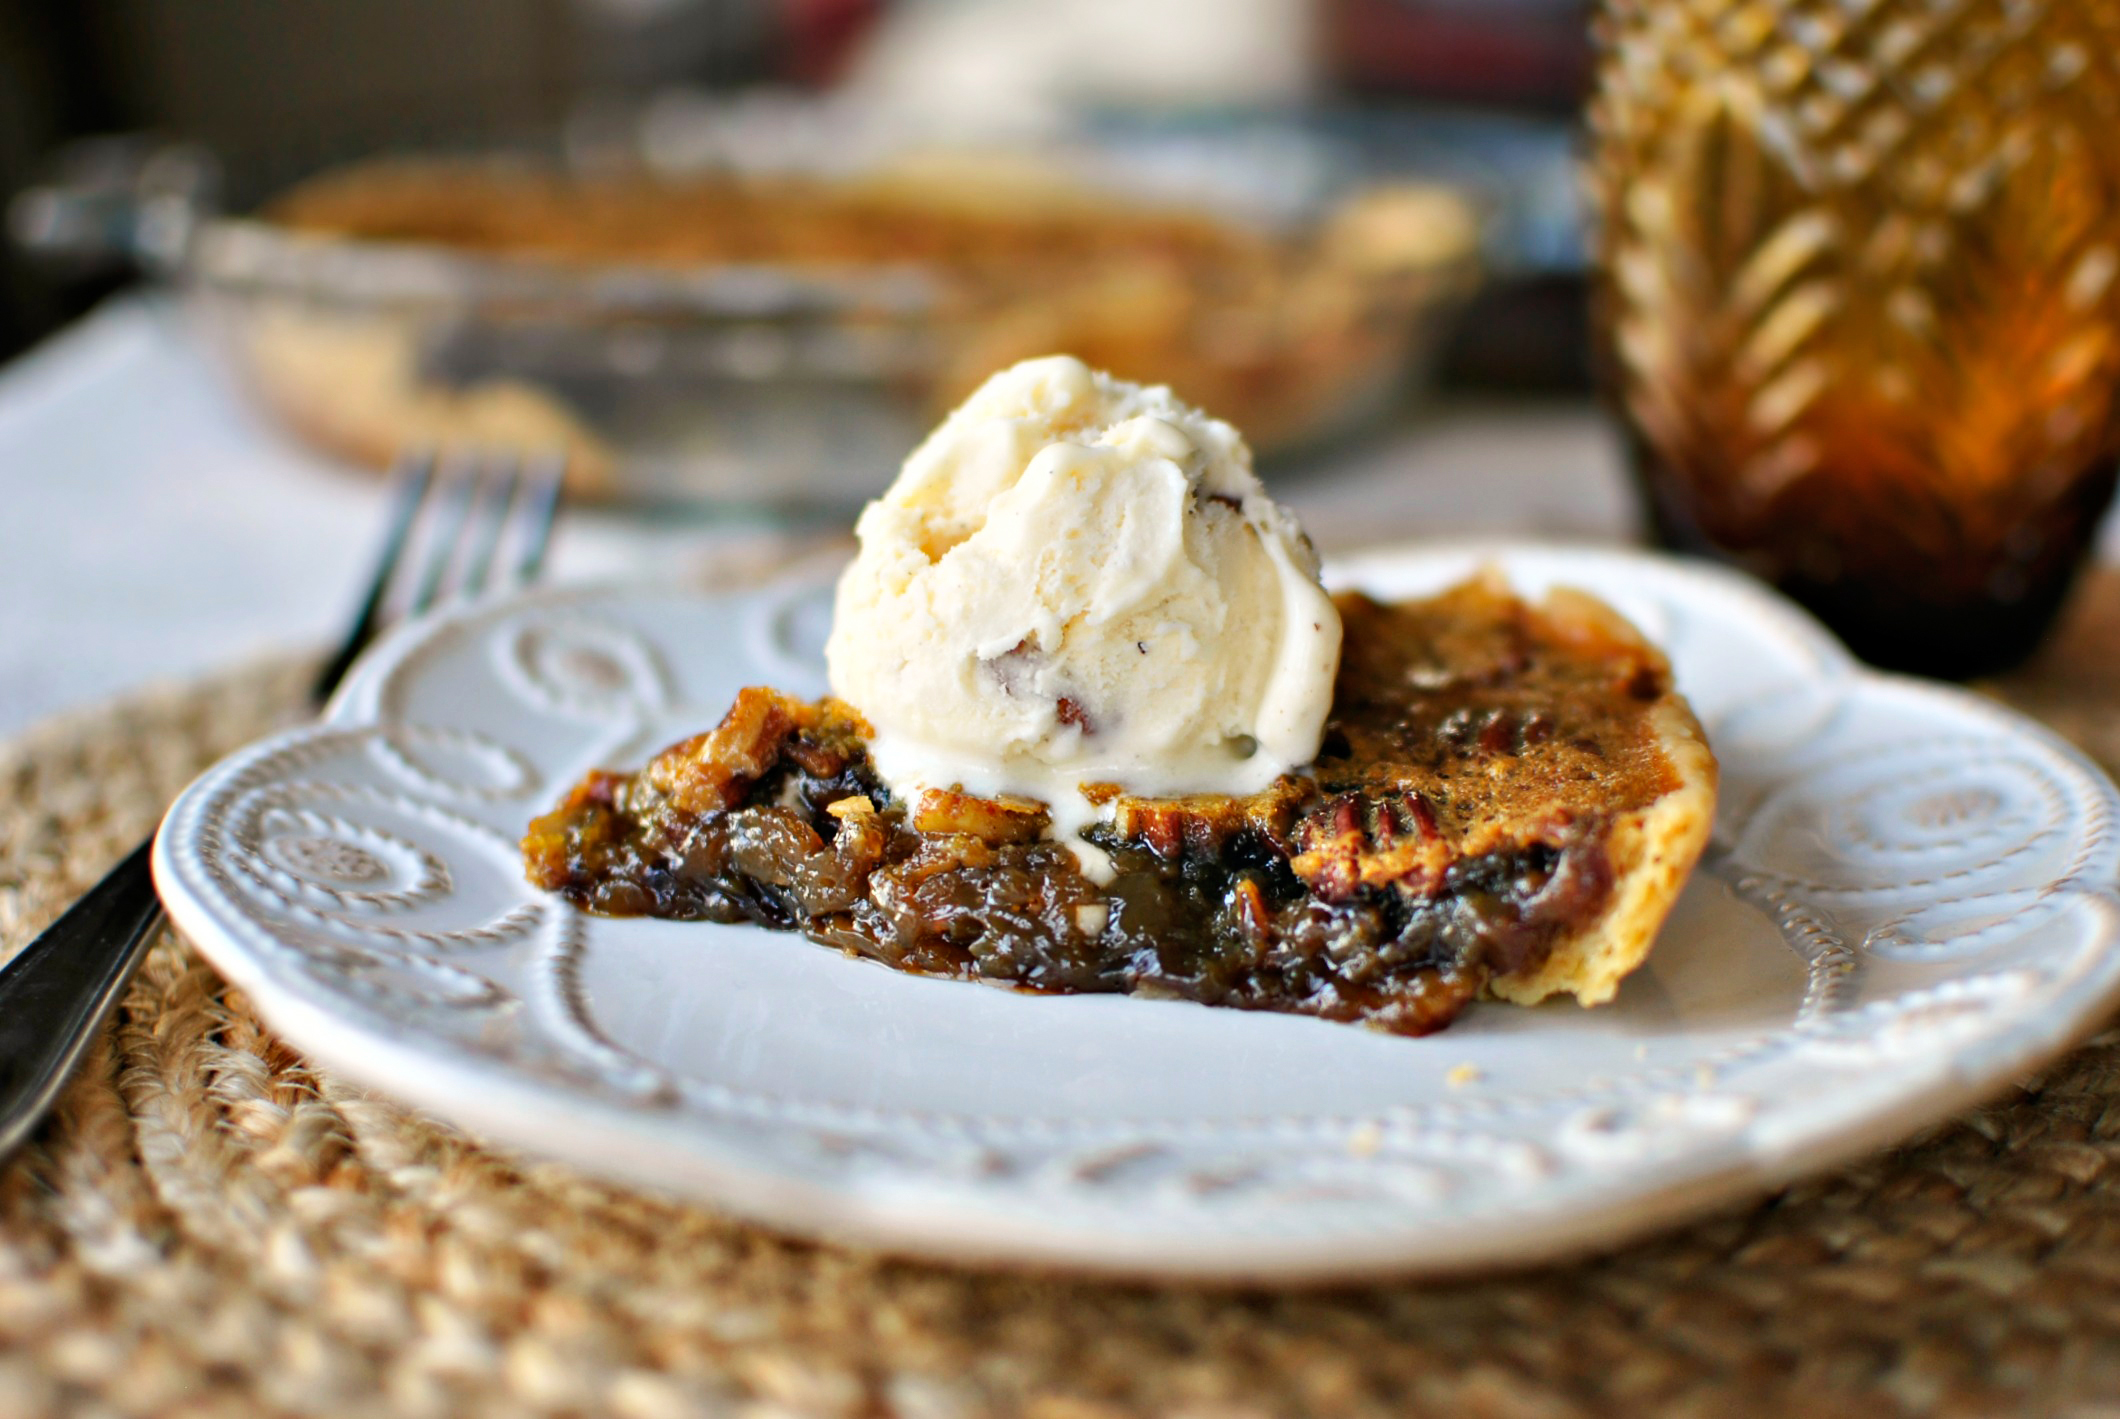 Tasty Kitchen Blog: Nutella Pecan Pie. Guest post by Laurie McNamara of Simply Scratch, recipe submitted by TK member Megan of Wanna Be A Country Cleaver.